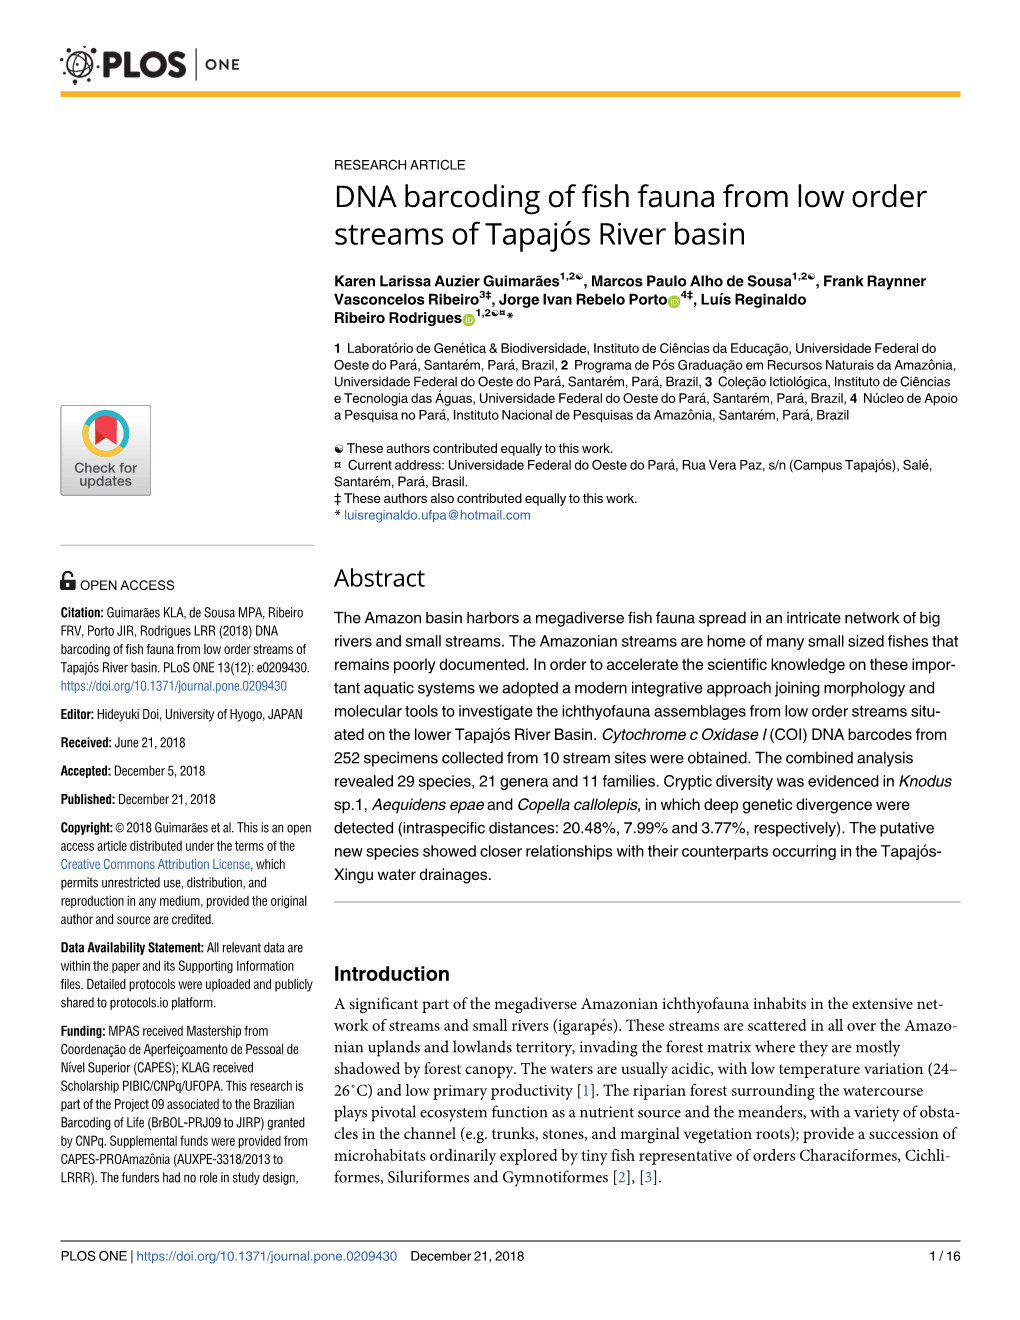 DNA Barcoding of Fish Fauna from Low Order Streams of Tapajós River Basin